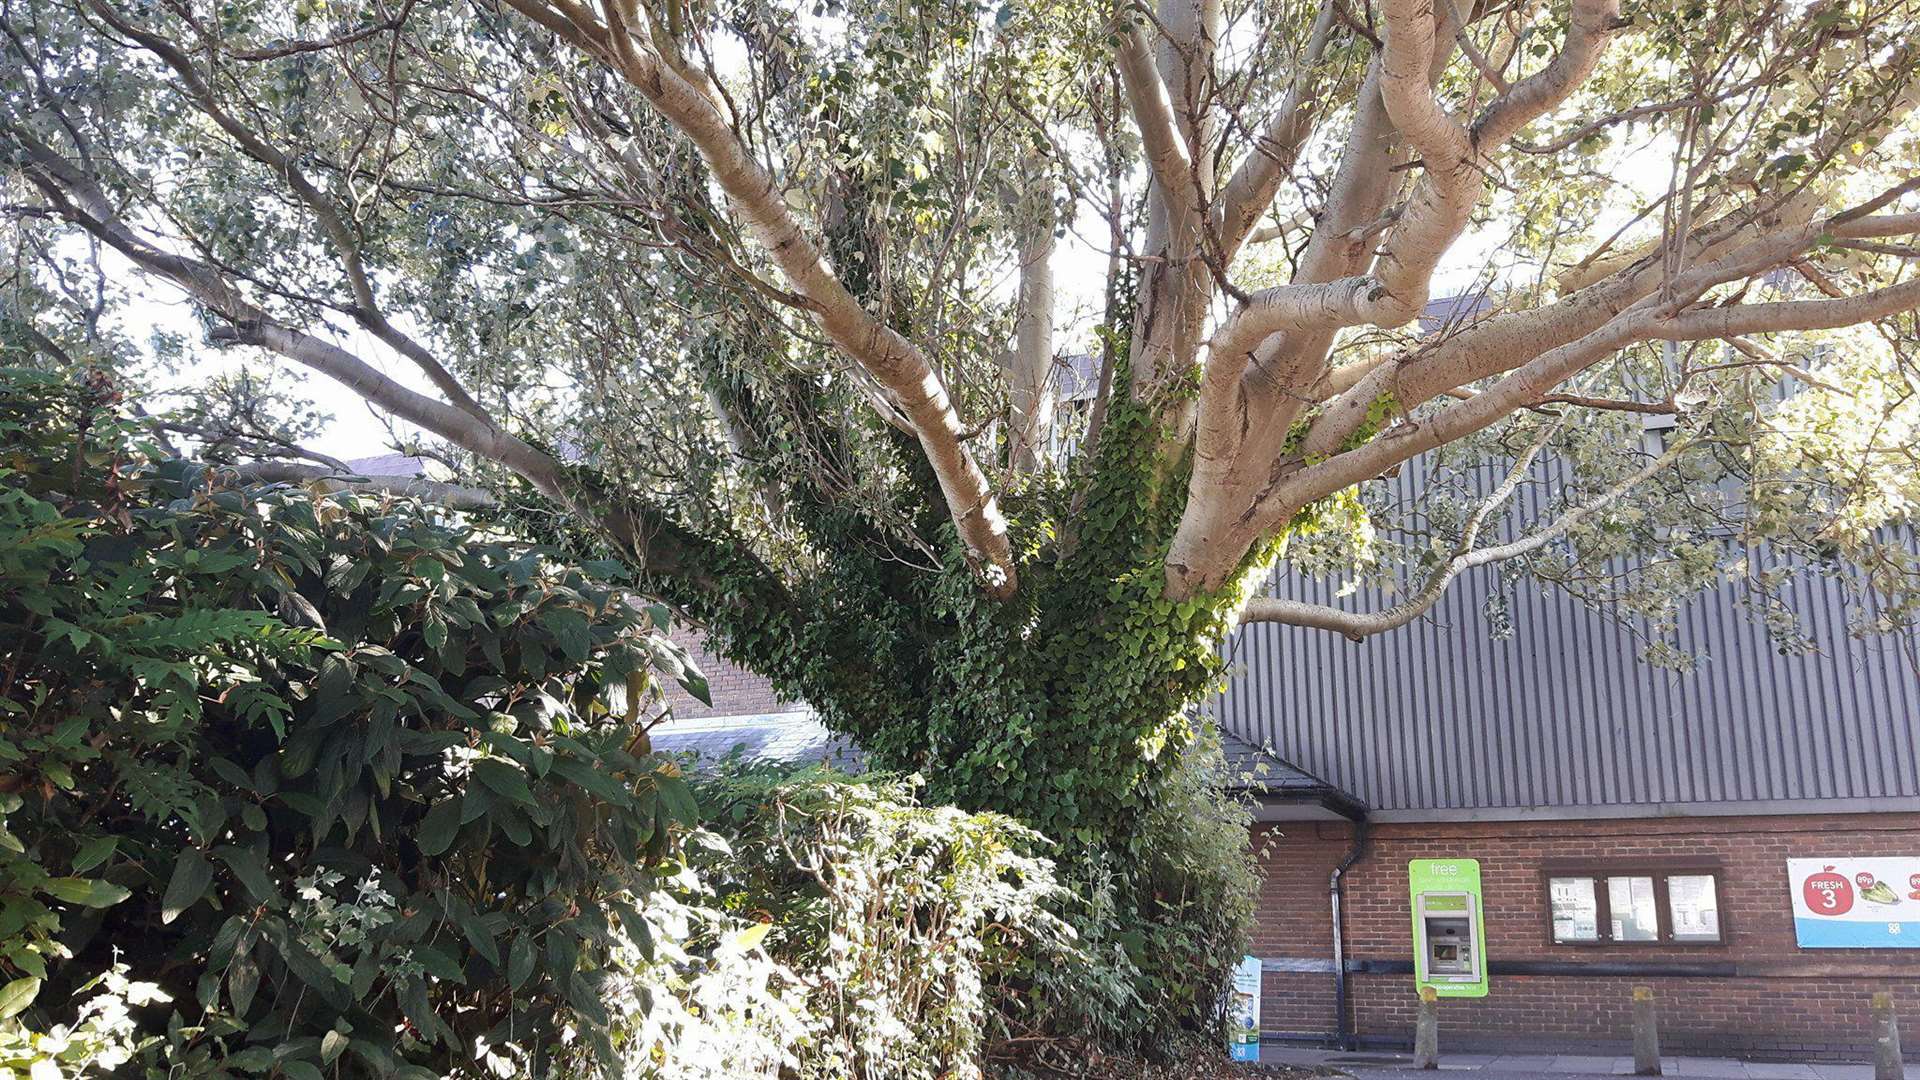 One of the four mature trees proposed to be felled as part of Aldi's plans for a new store